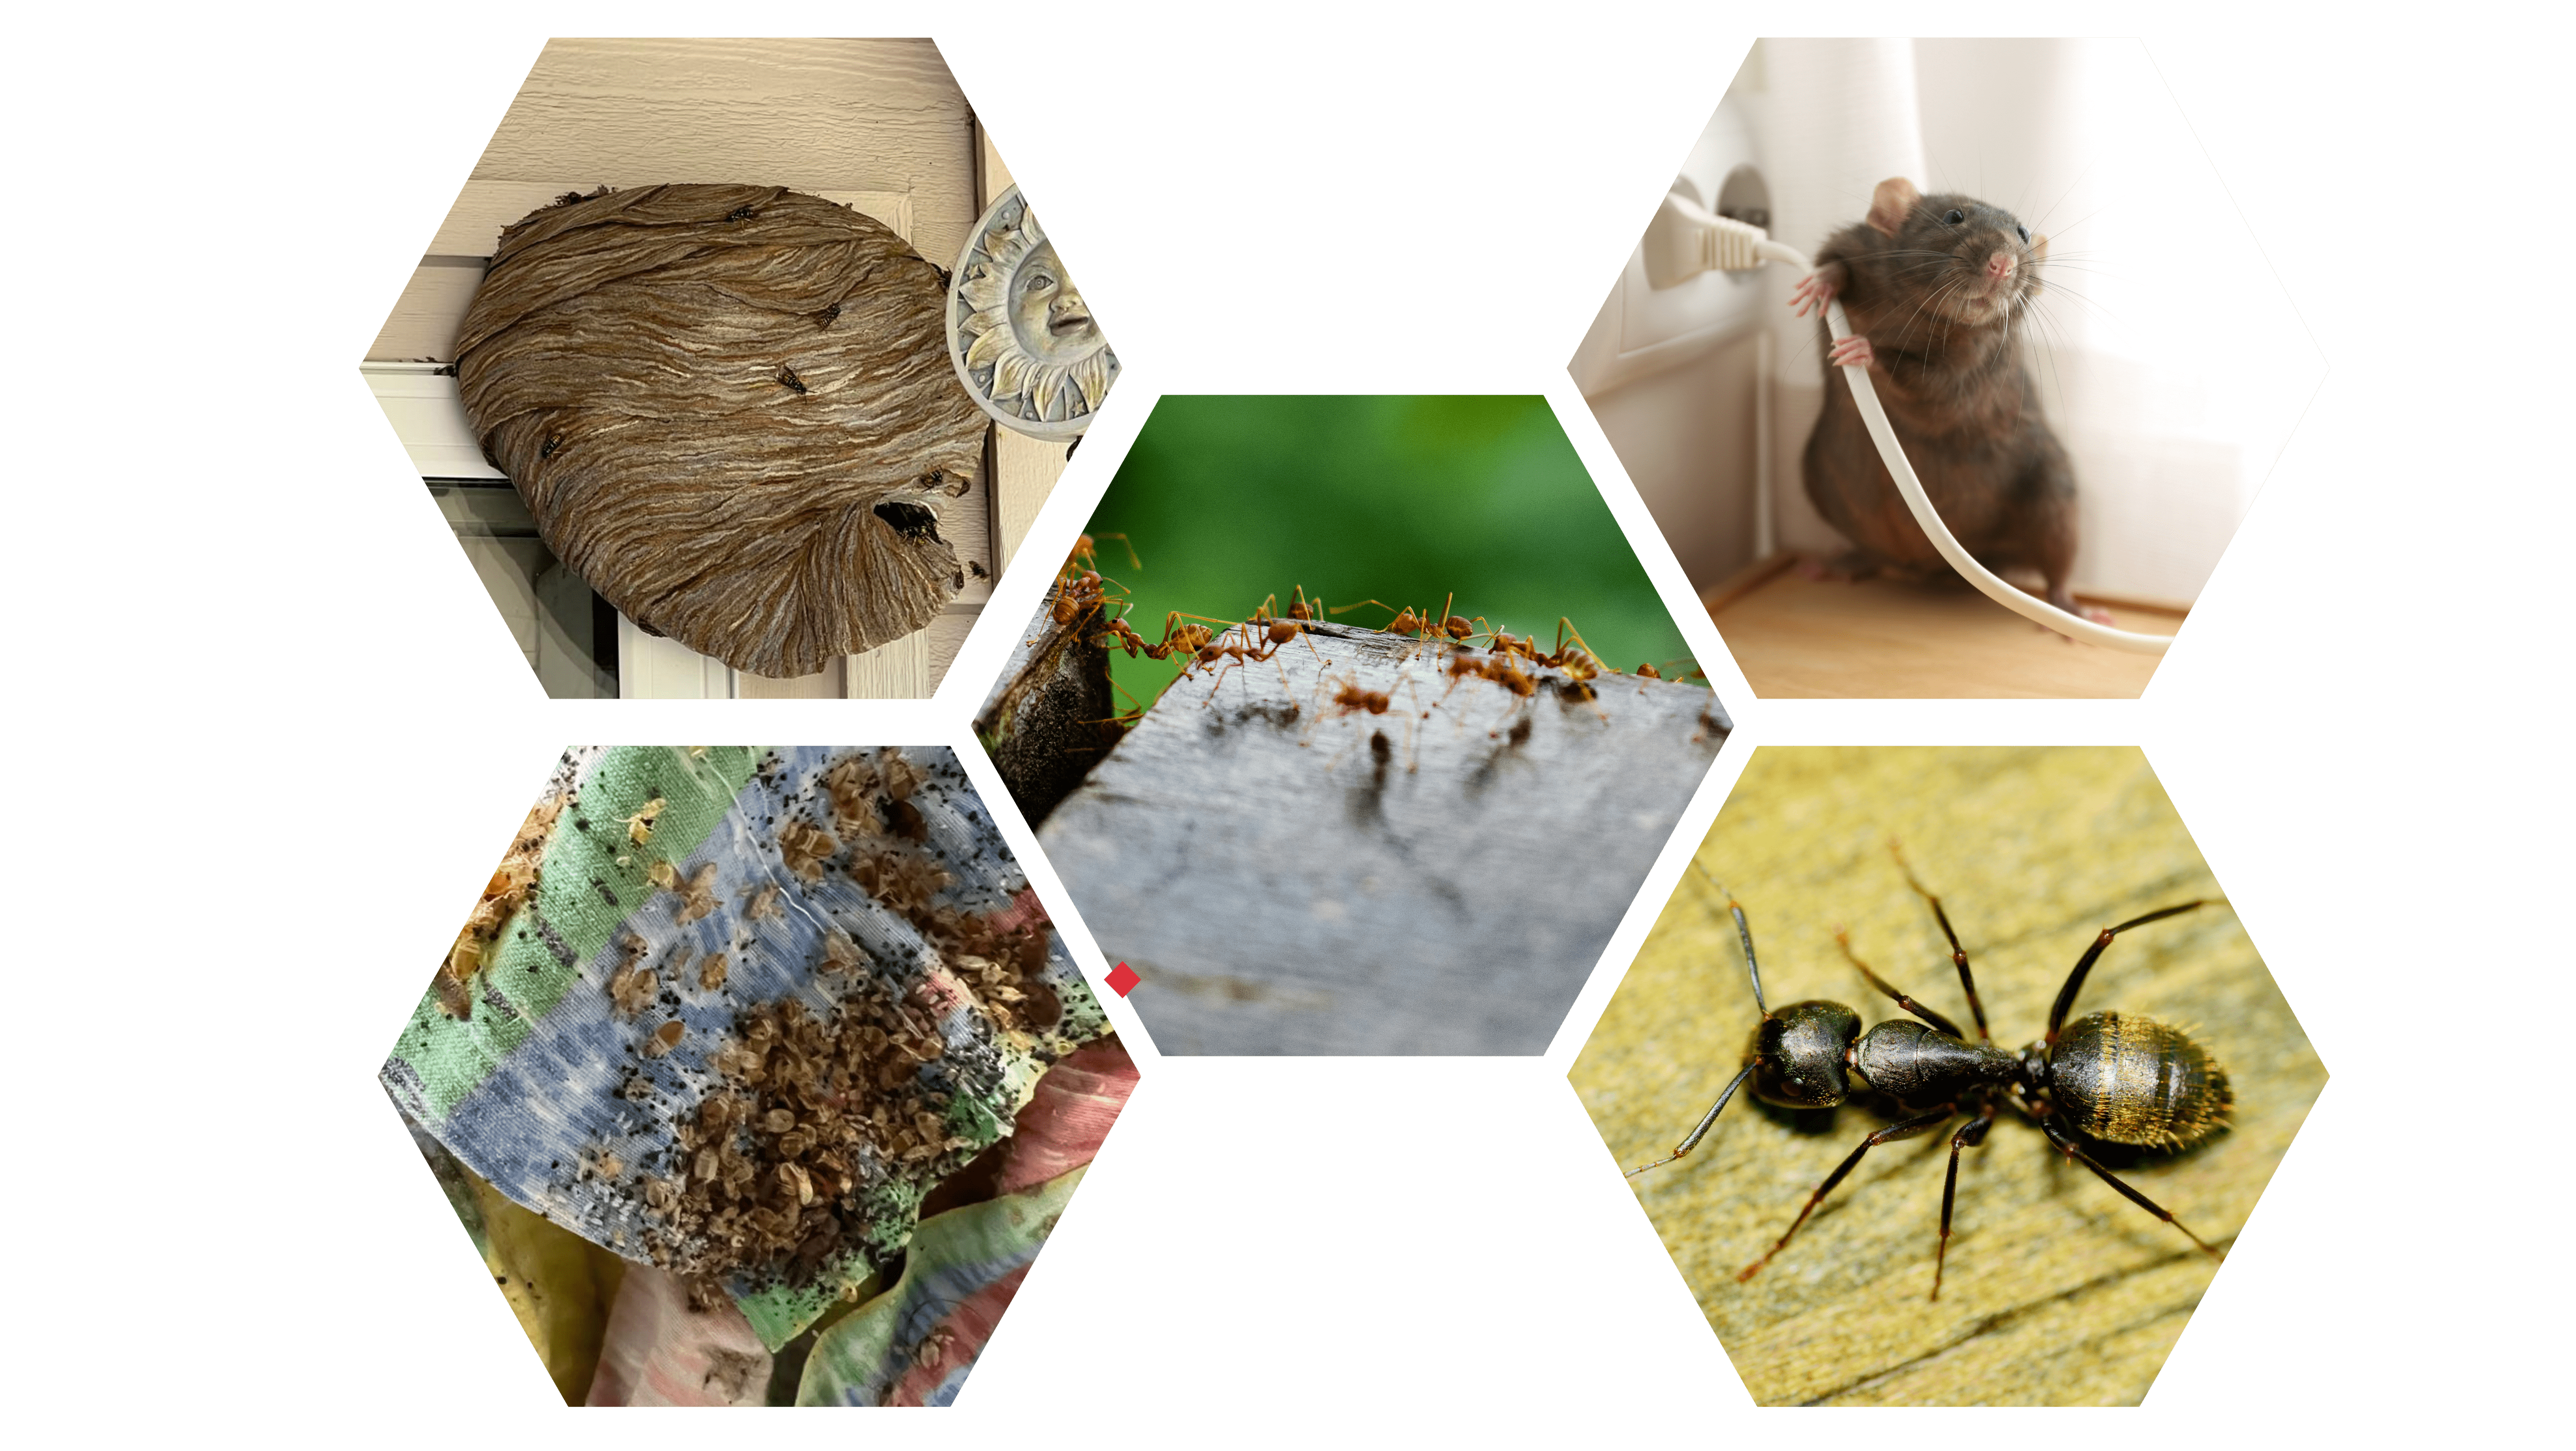 Get a pest-free home with our expert extermination services<br>
